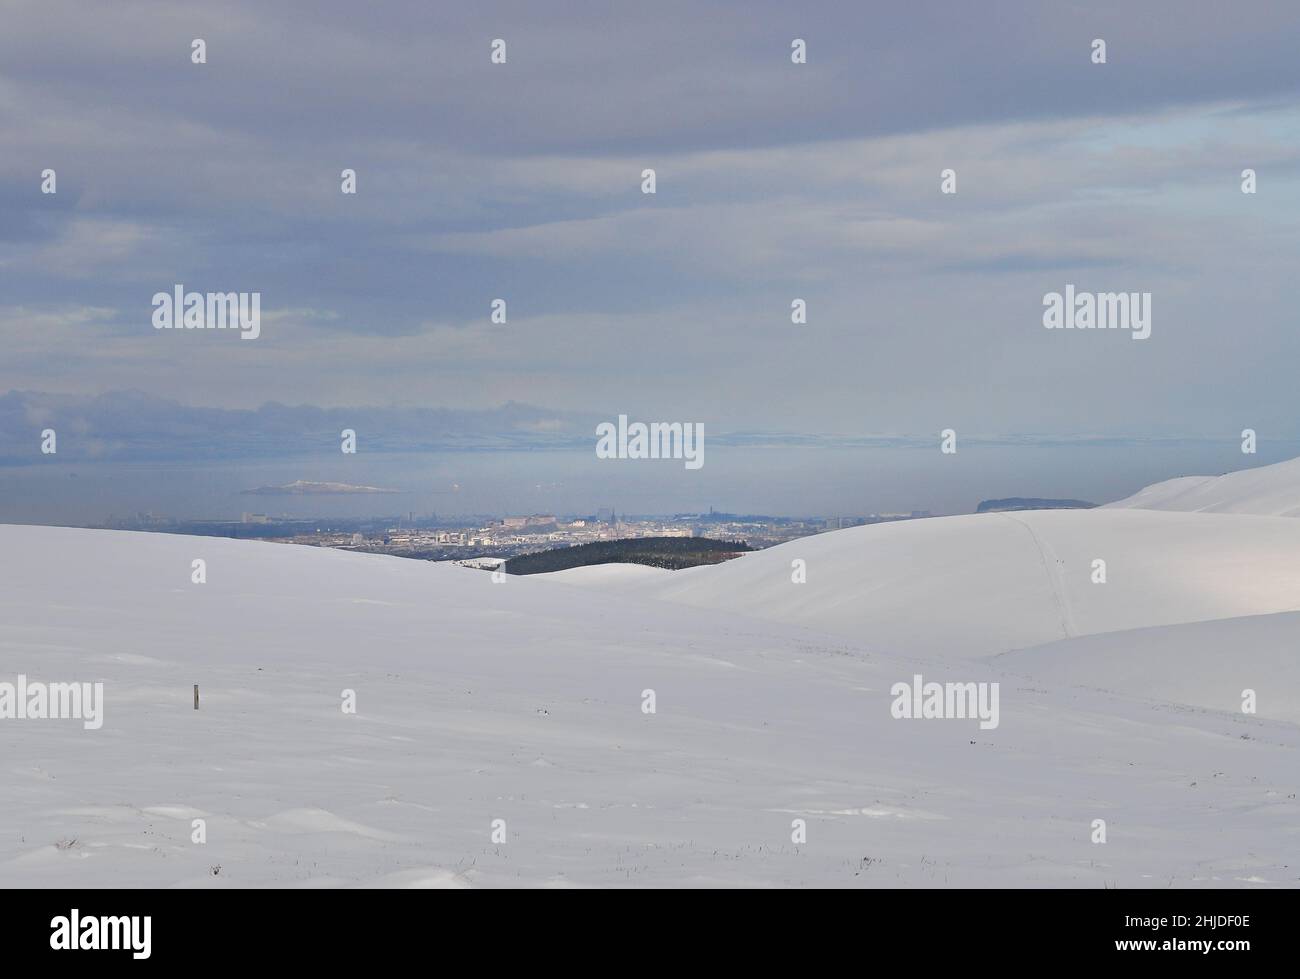 A snowy winter view of Edinburgh city centre from the Pentland hills, with the Firth of Forth, Inchkeith island and Fife in the background. Stock Photo